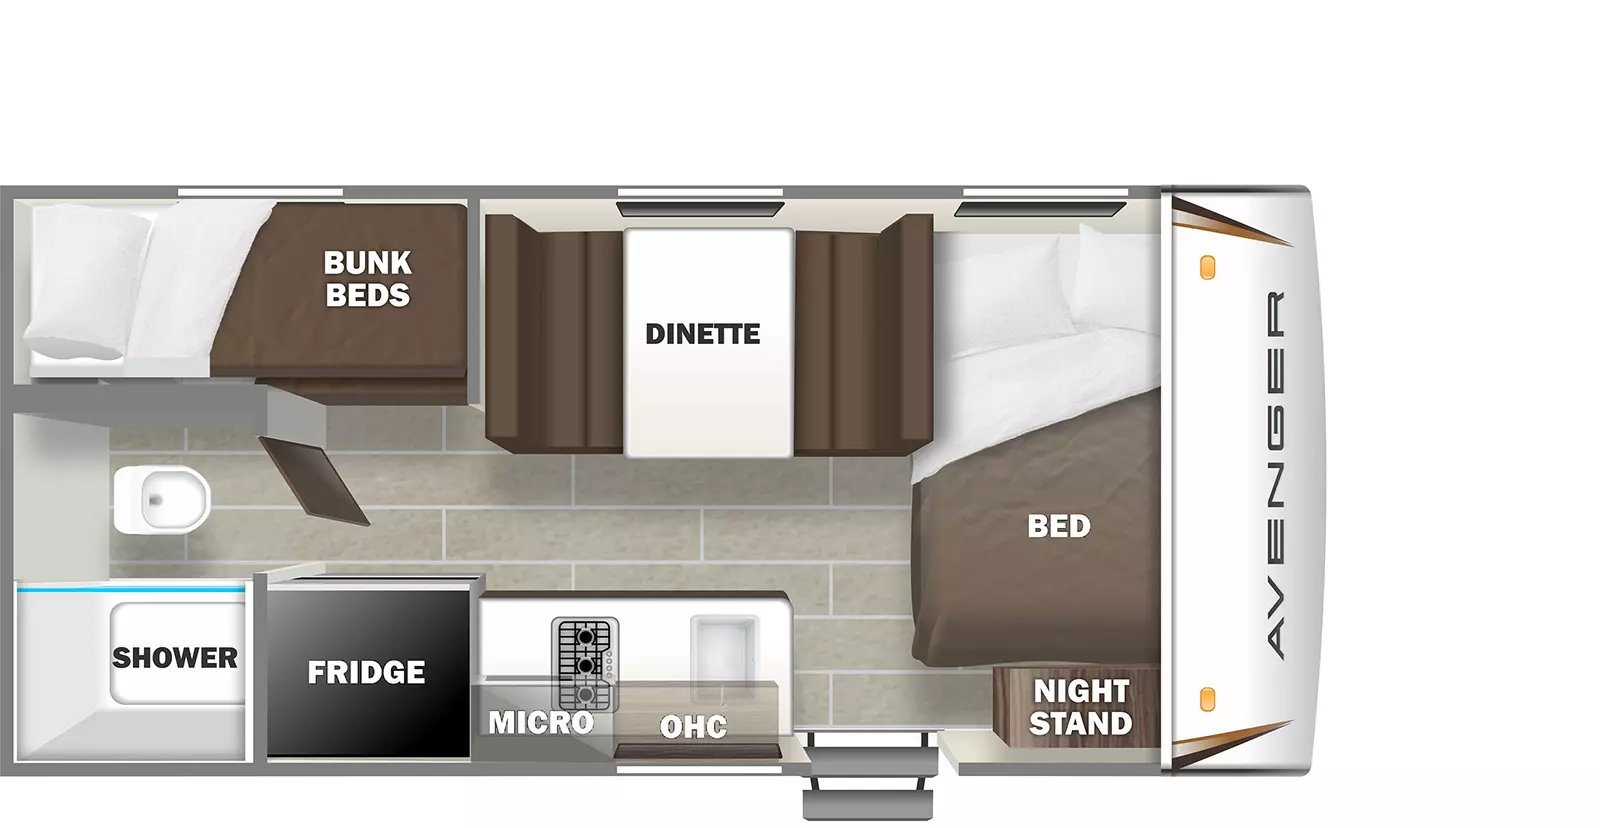 The Avenger LT 16BH RV floorplan is 20 feet seven inches long. It has one entry door. The entry door leads to the bed and nightstand on the right a booth dinette straight ahead and a kitchen area to the left. The kitchen area has a countertop and a fridge. The countertop has a stove with a microwave above and a sink with overhead storage above. The rear off door corner of the RV has bunk beds. The rear center of the RV has a bathroom with a shower and a toilet.